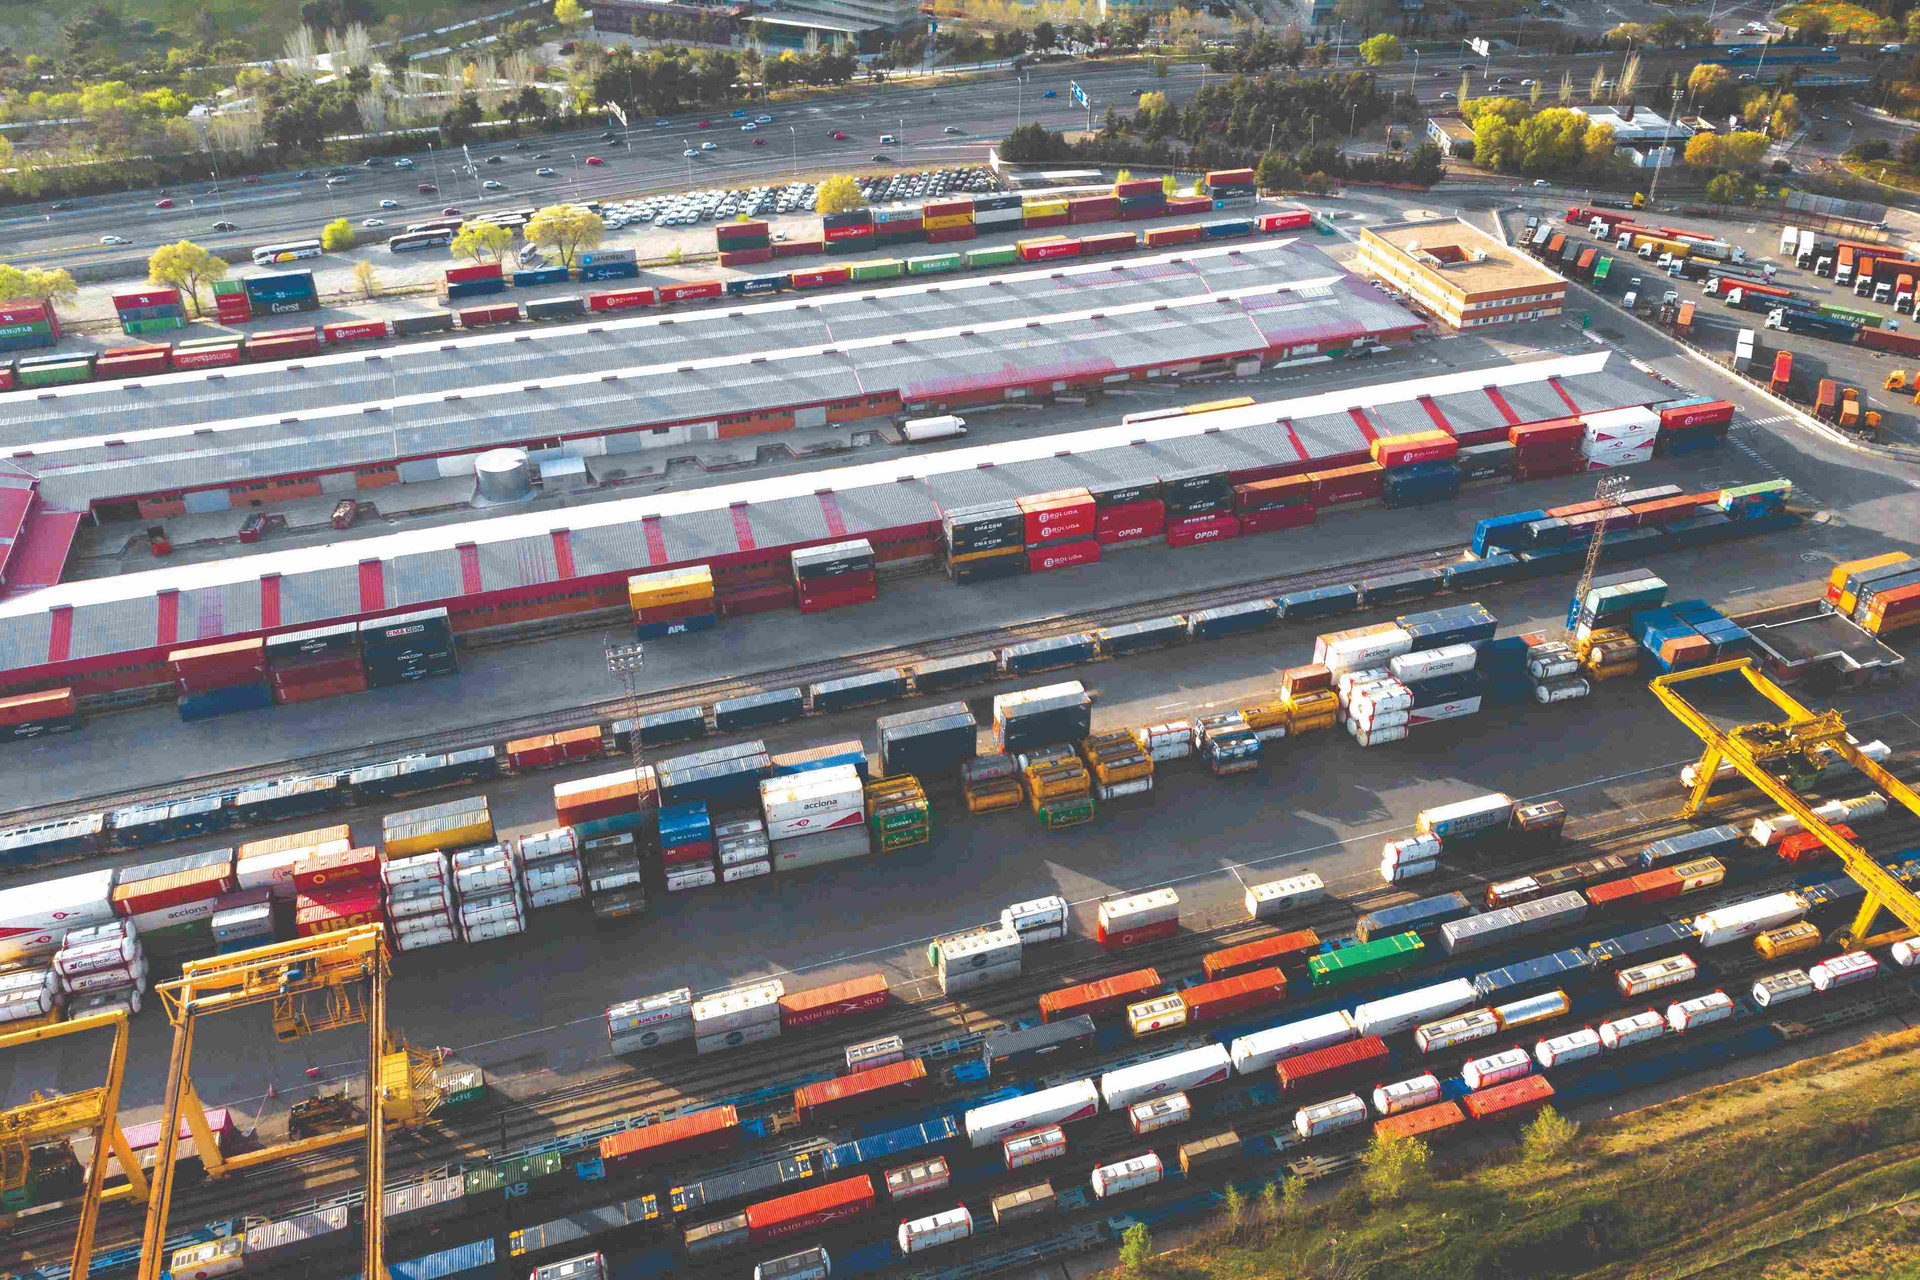 containers-railways-shipment-concept-compressed.jpeg